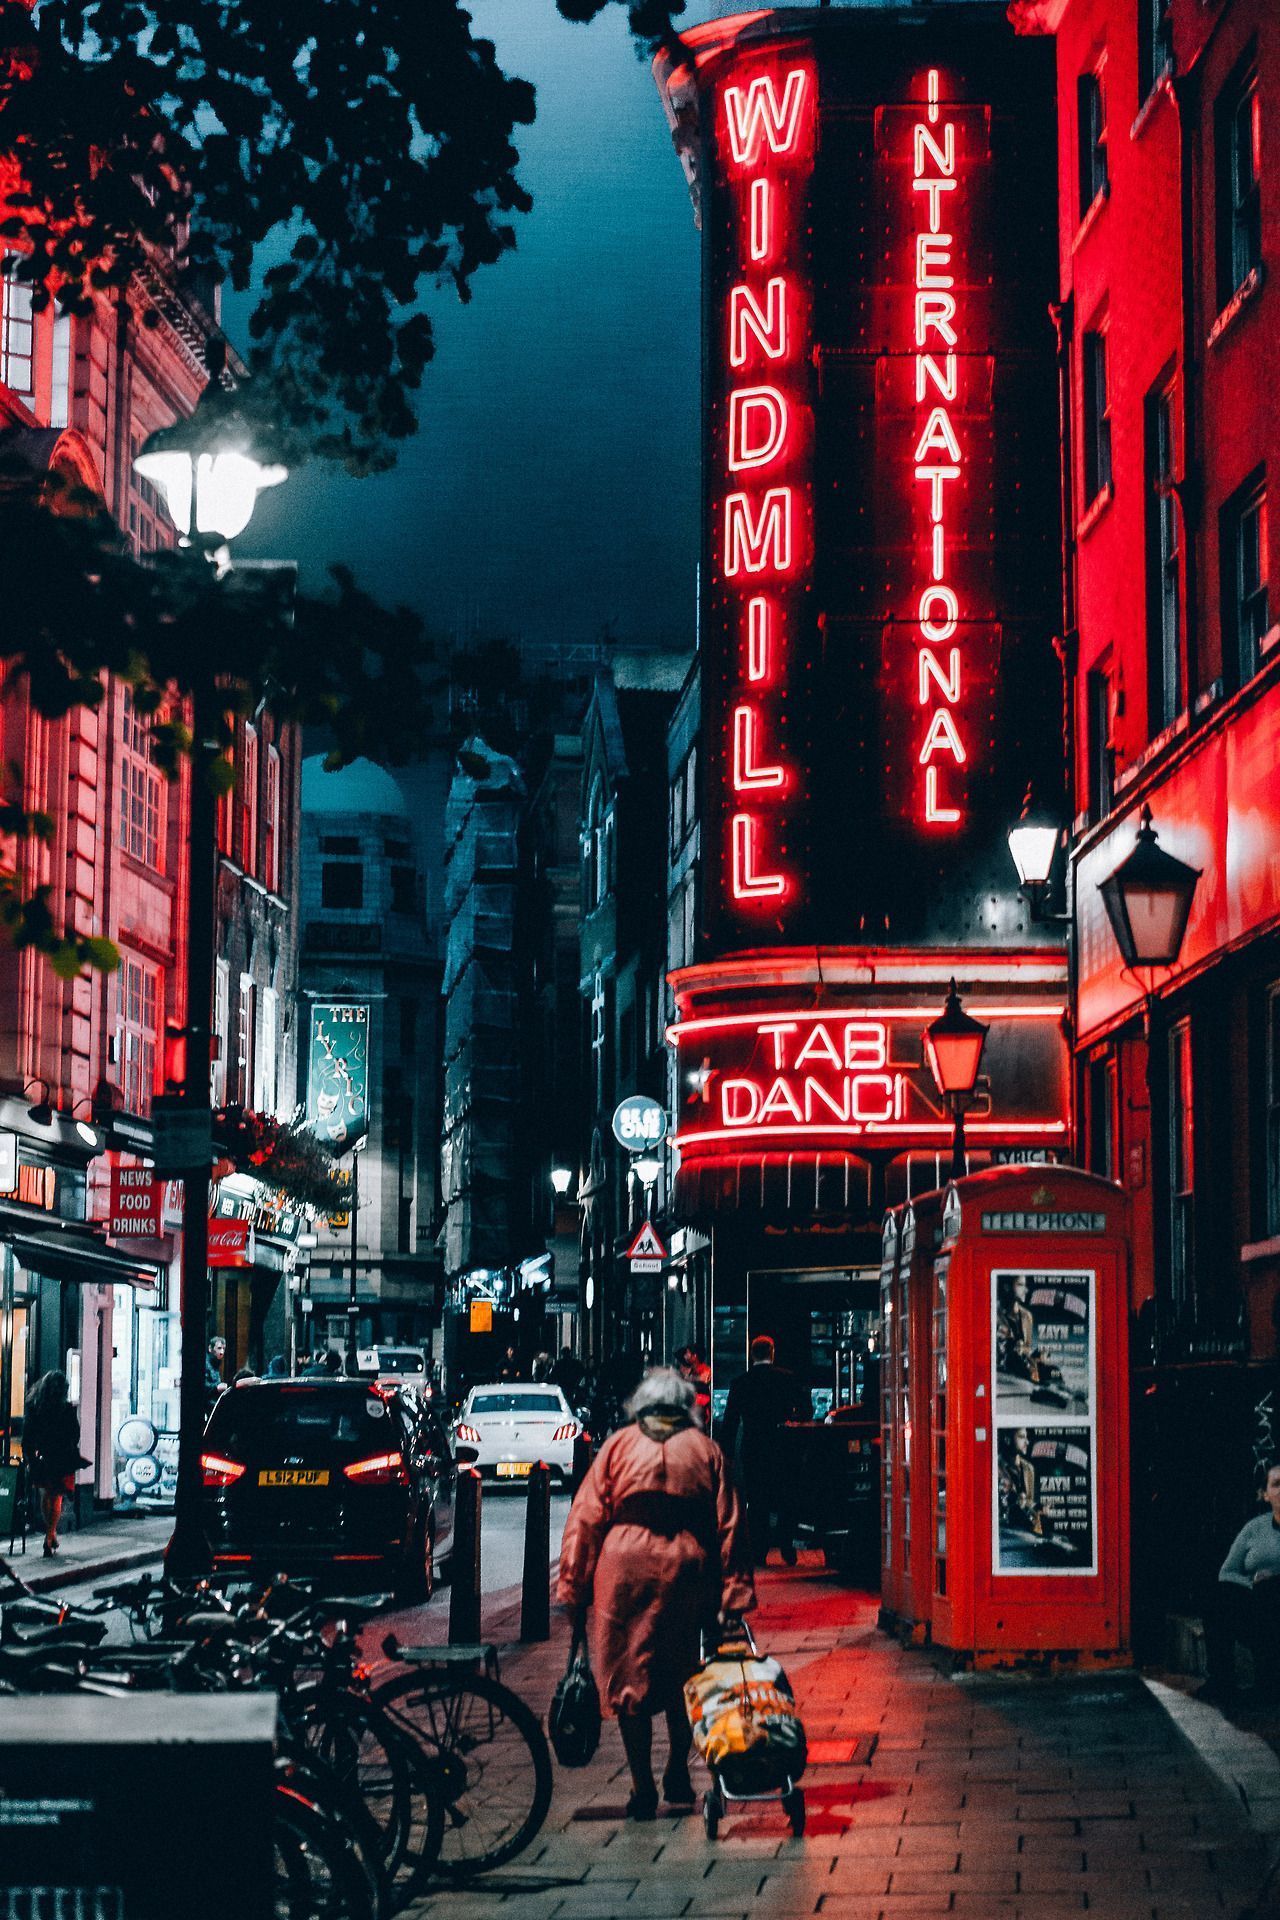 A woman is walking down the street - City, anime city, retro, neon red